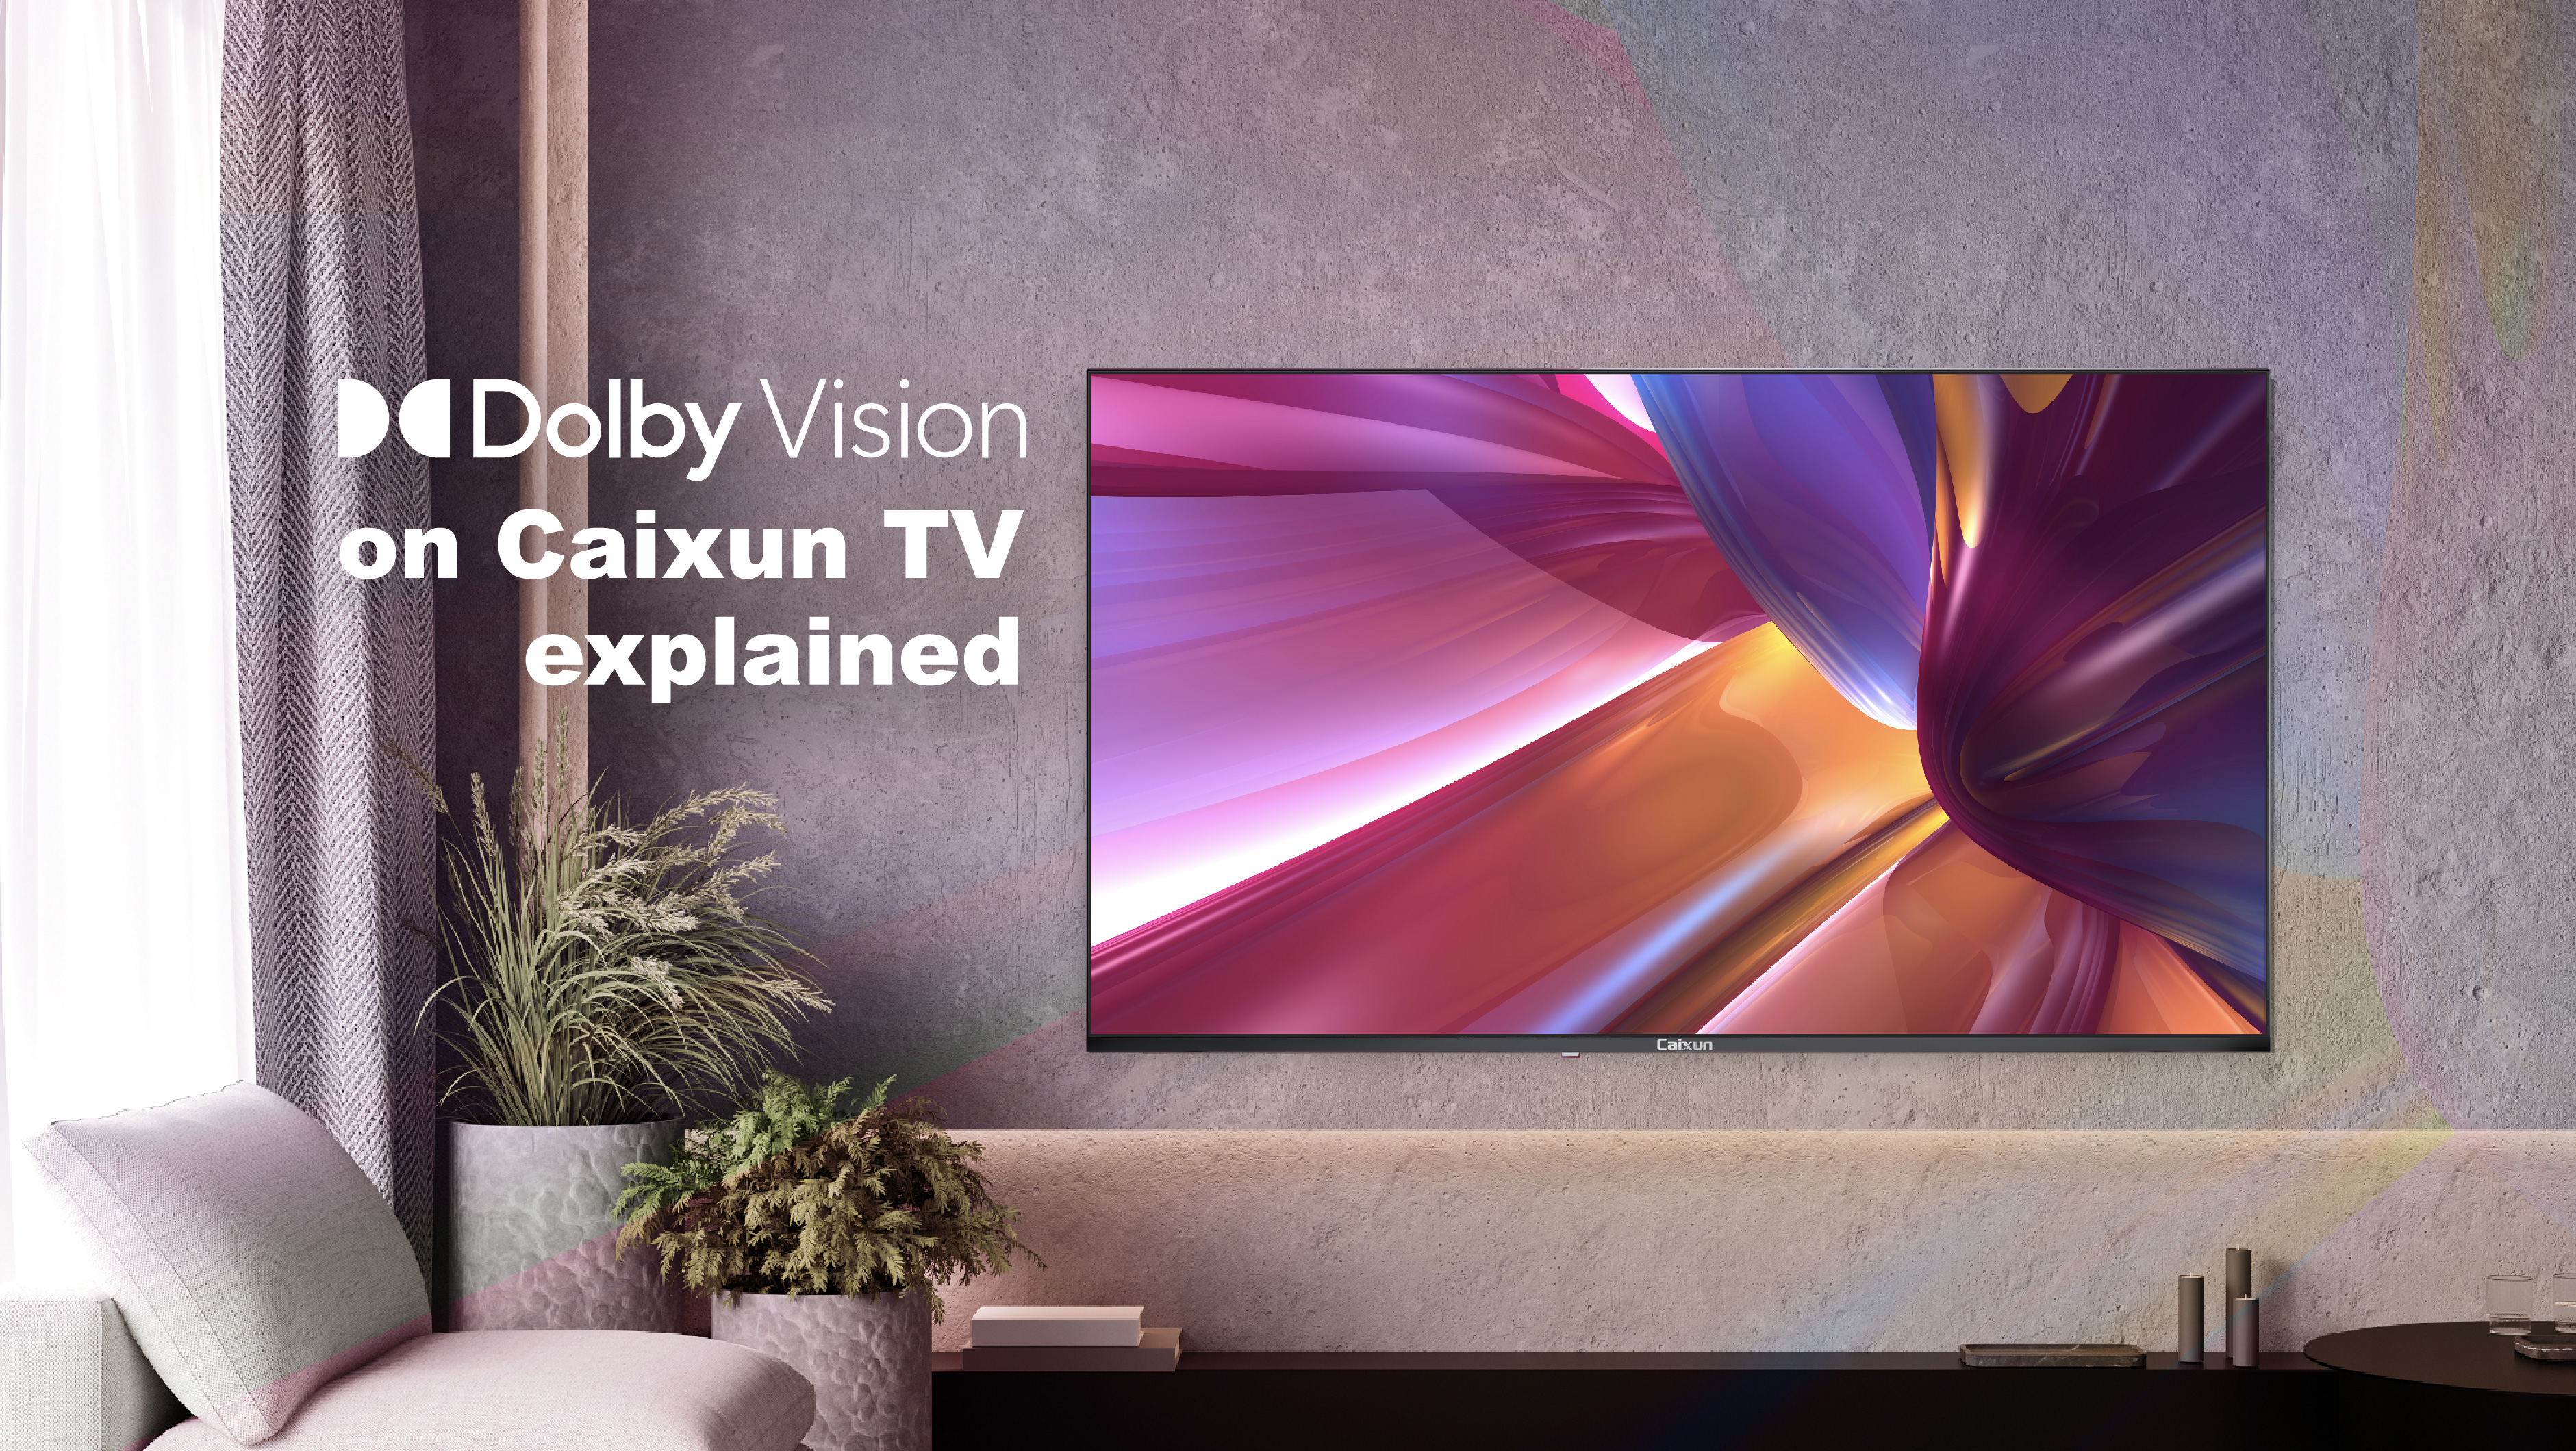 Dolby Vision on Caixun TV explained